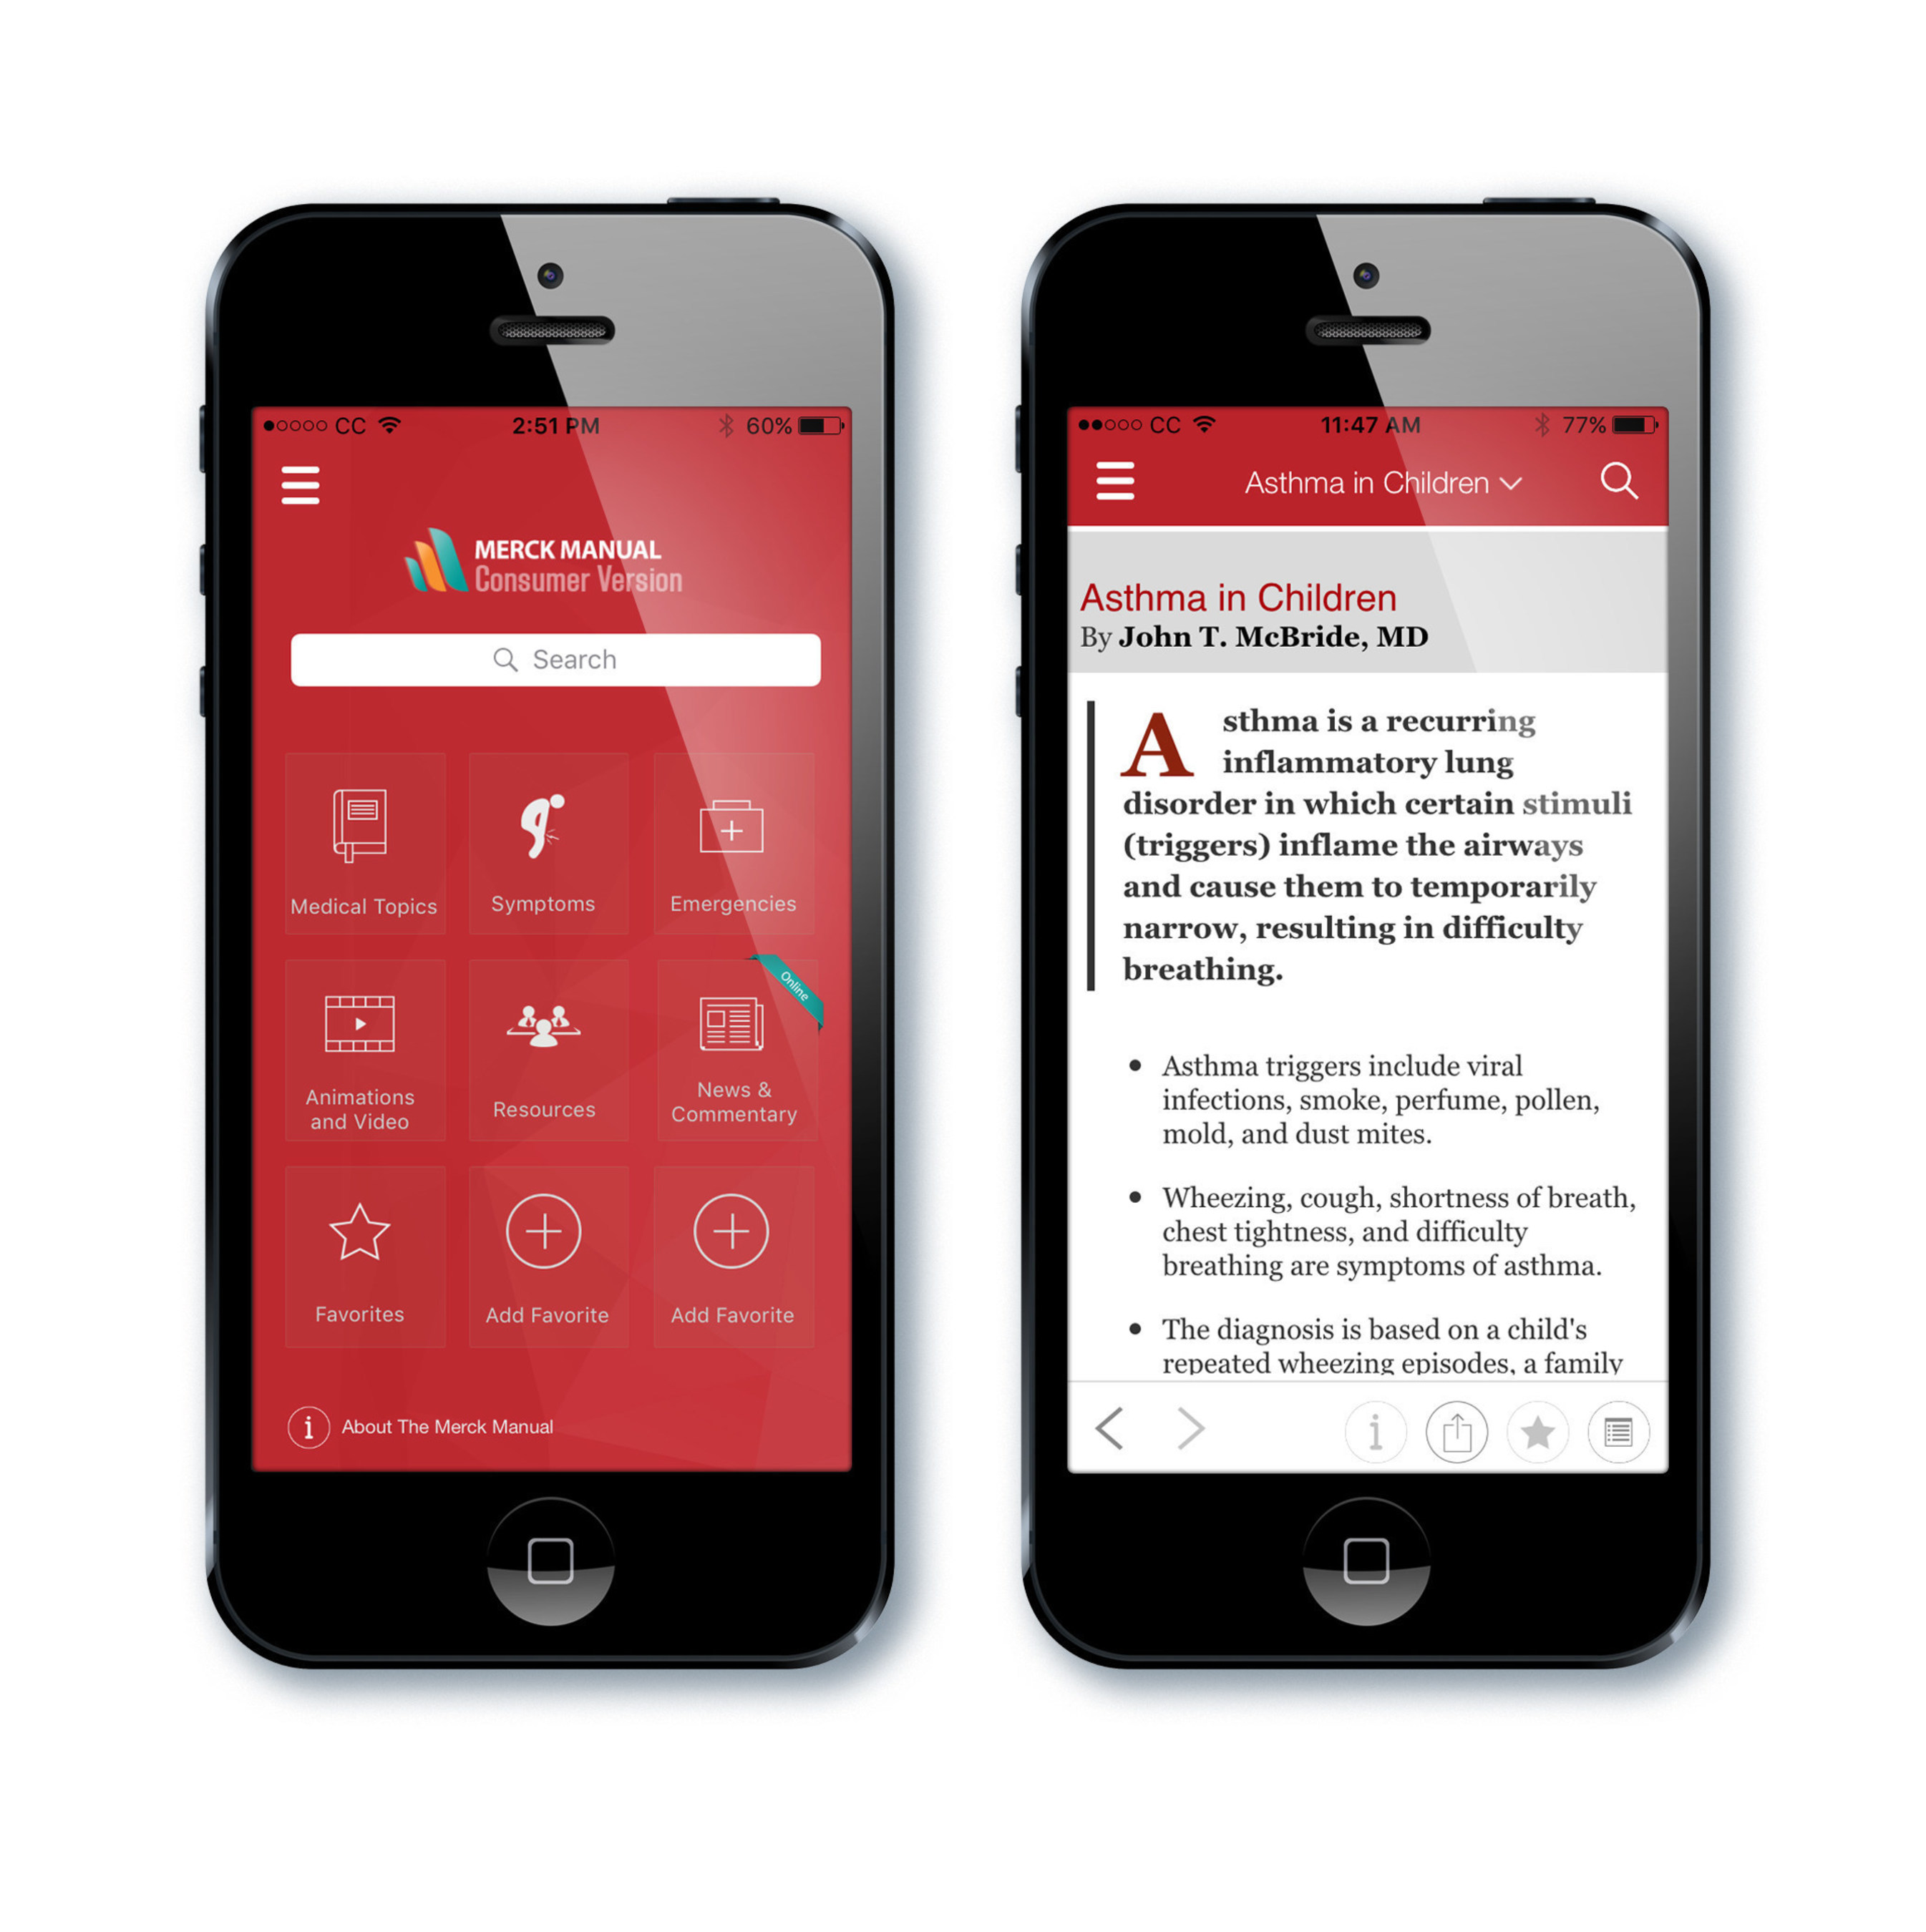 The Merck Manuals Consumer App provides free, offline access to thousands of medical resources